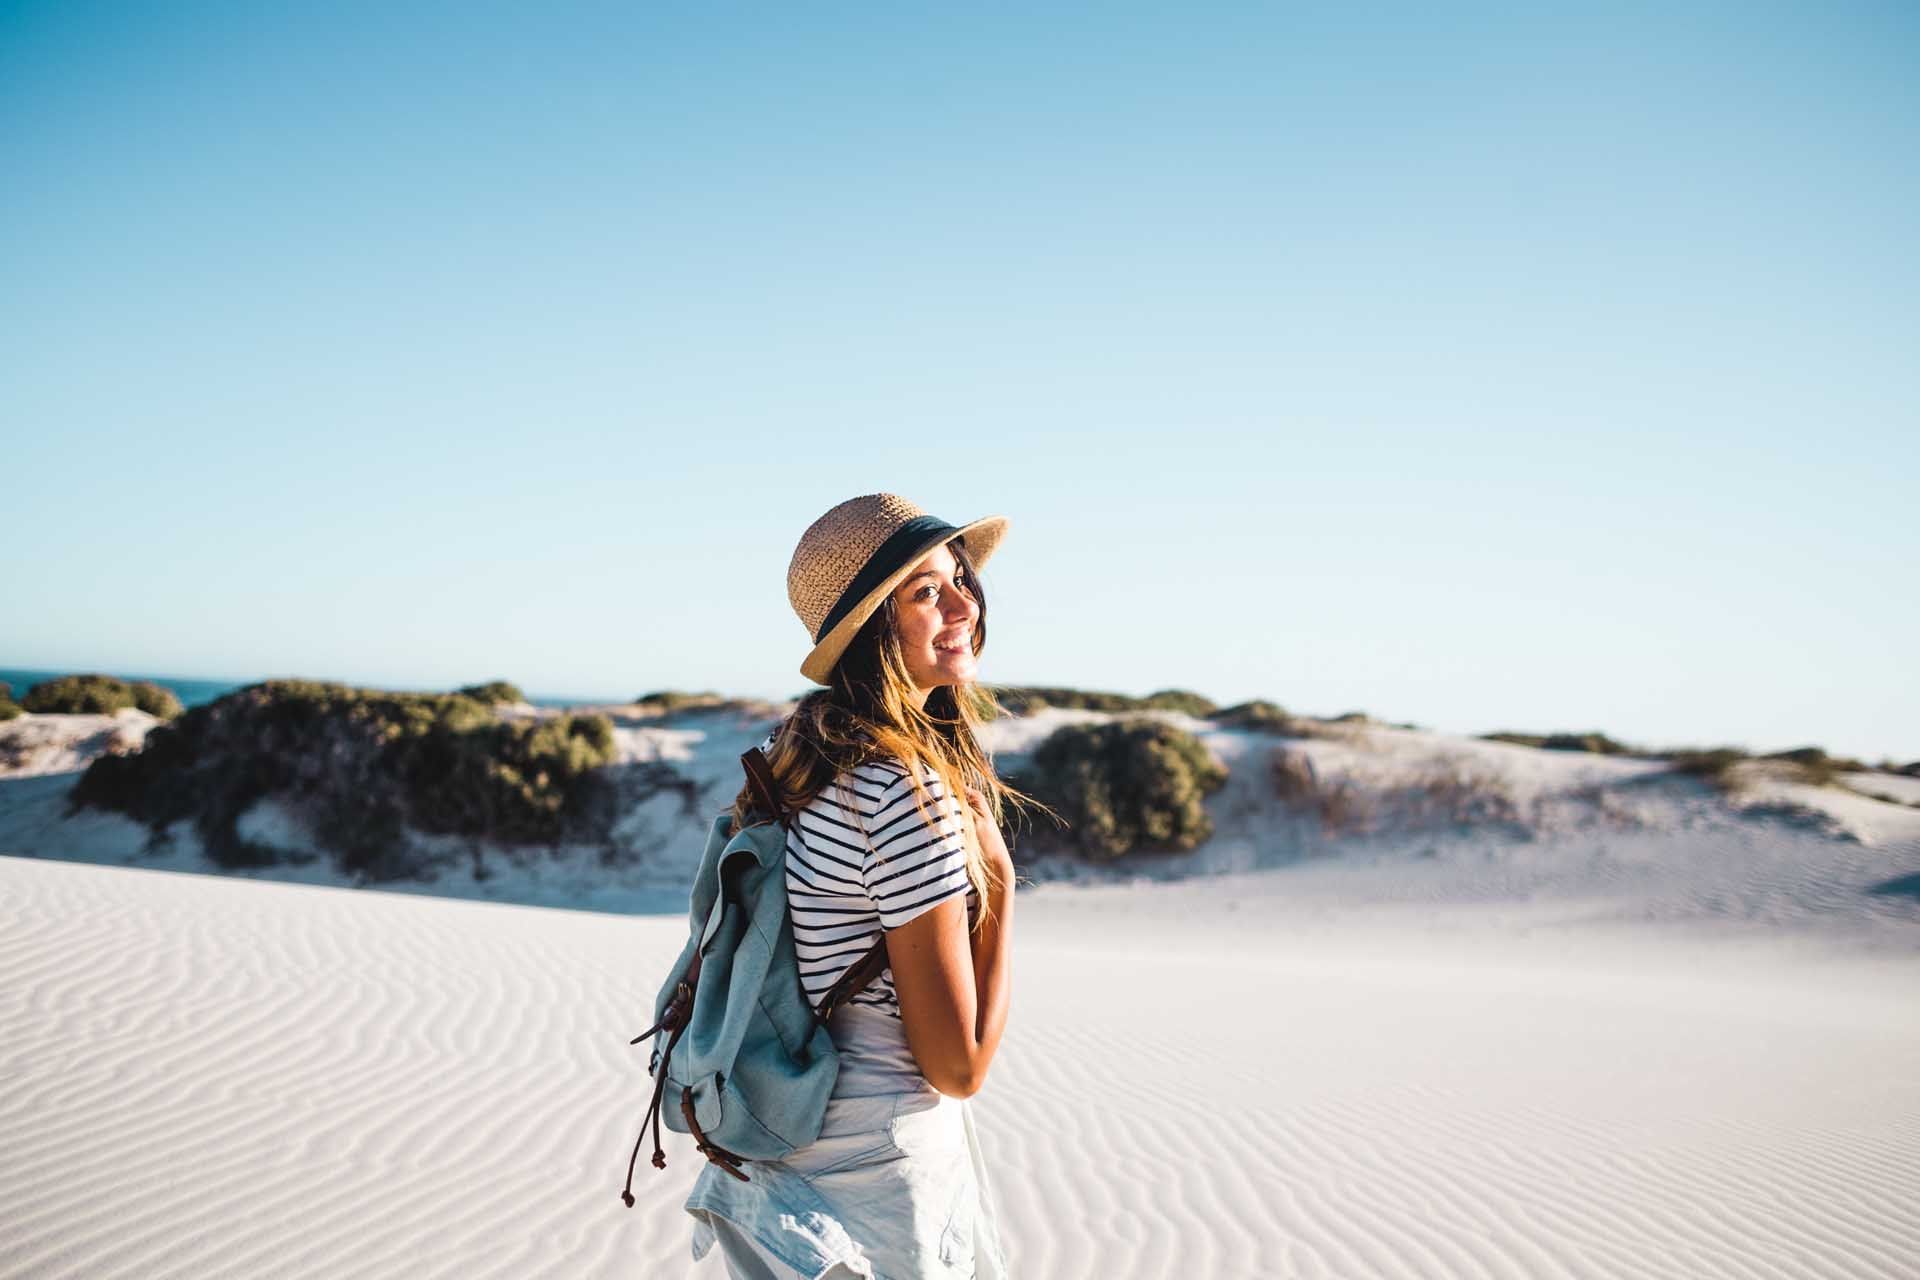 Solo Travel Tips For Women - Empowering Adventures And Safety Essentials